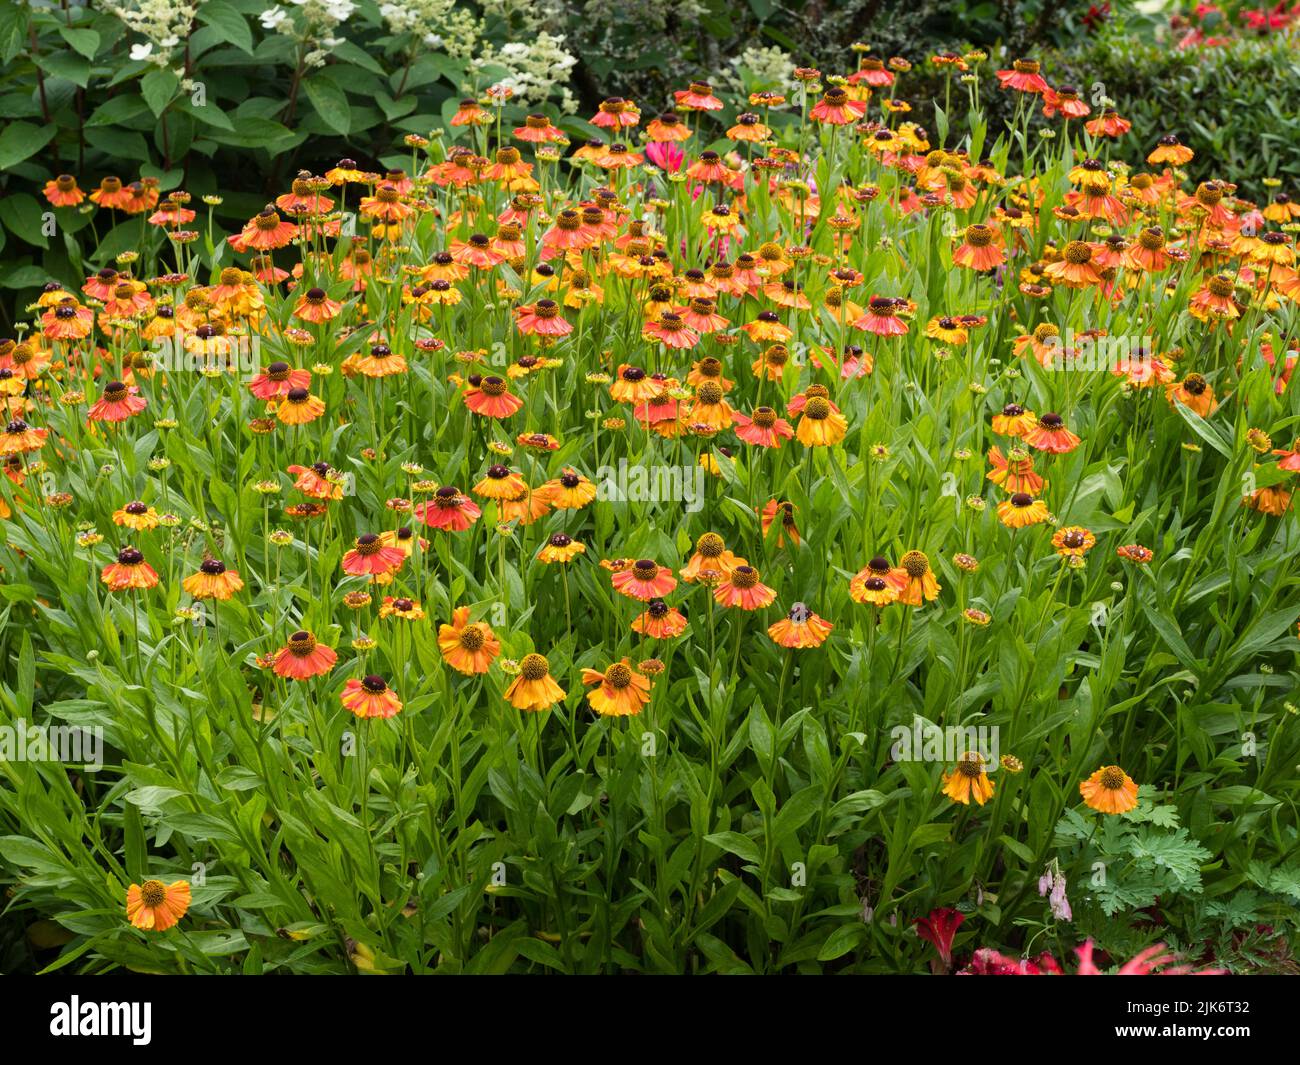 Red, yellow and orange flowers of the hardy, long flowering ornamental perennial sneezeweed, Helenium 'Sahin's Early Flowerer' Stock Photo